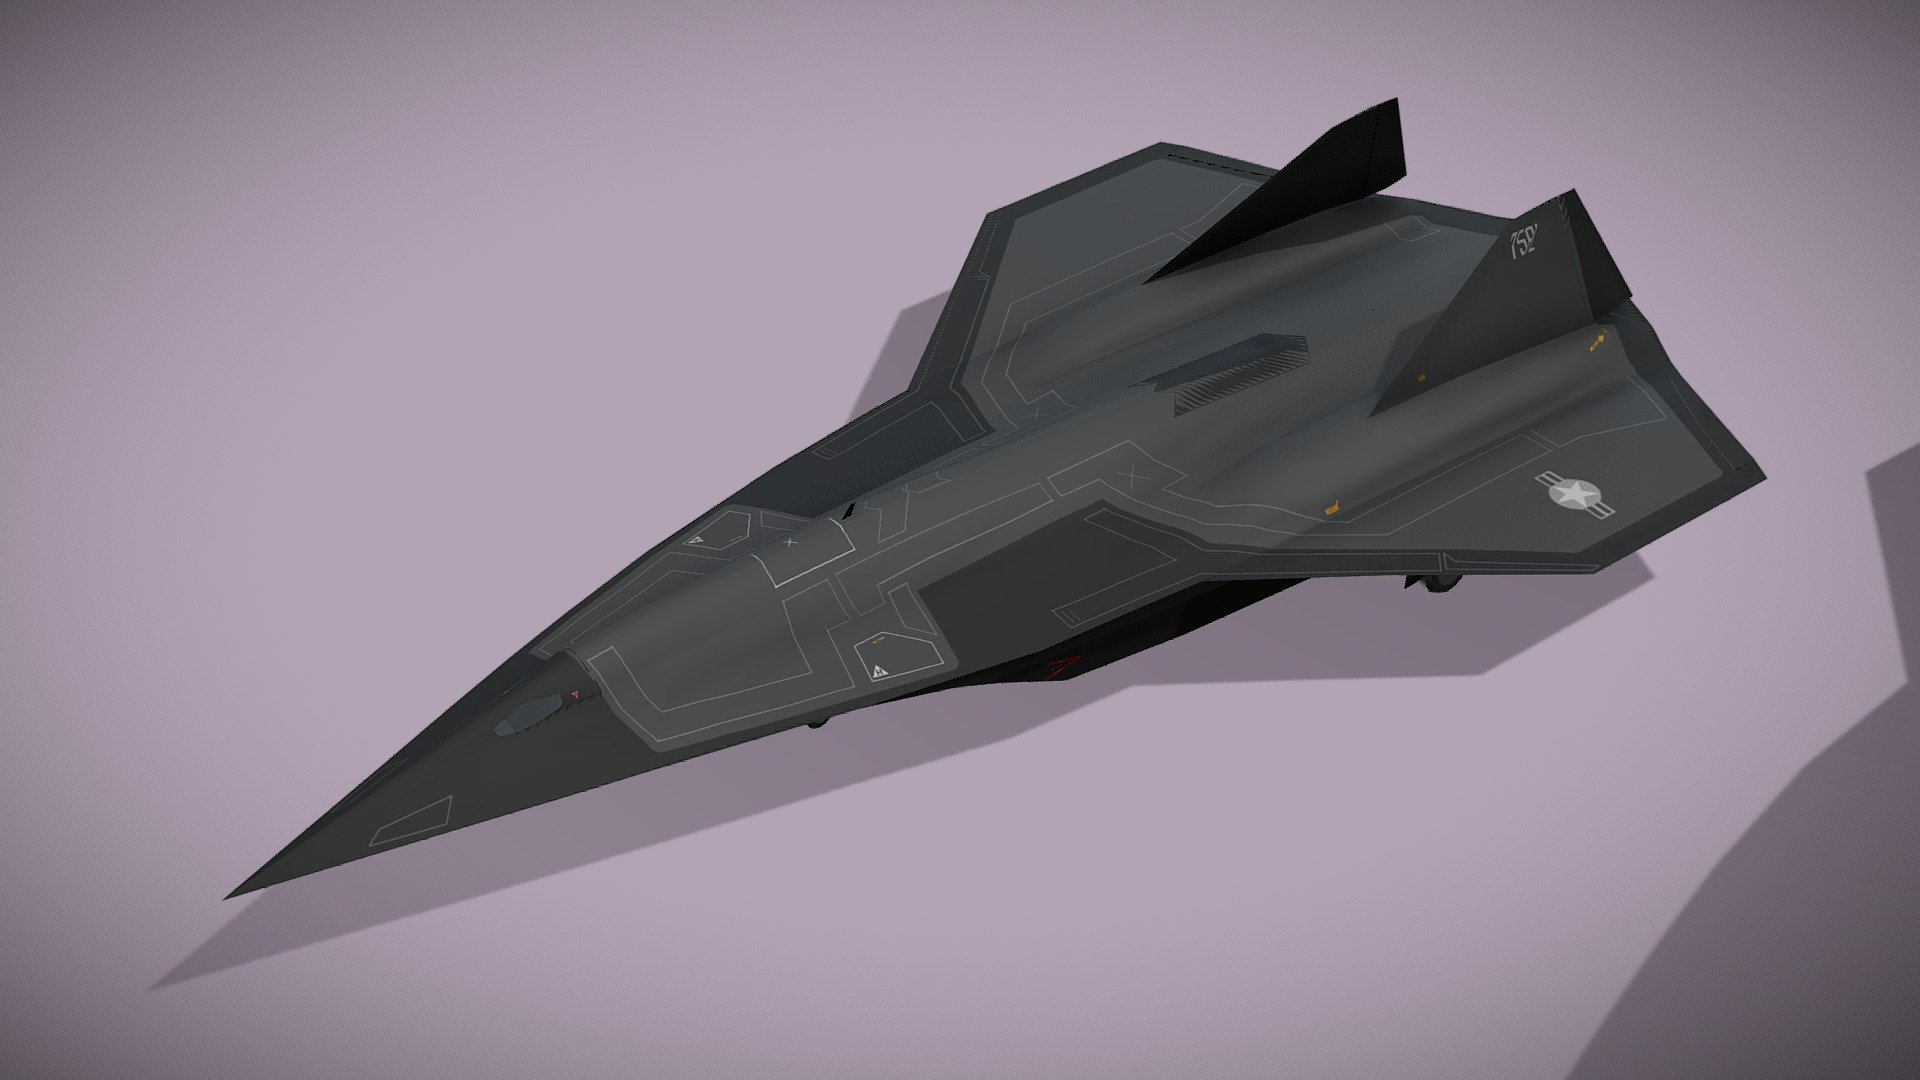 Lockheed SR-72 Darkstar

Lowpoly model of american concept hipersonic jet



In Top Gun: Maverick, Captain Pete “Maverick” Mitchell takes his need for speed to a new realm: the hypersonic realm, that is. The Top Gun team made a logical choice. After all, the fictional SR-72 “Darkstar” hypersonic aircraft is meant as a follow-on to the SR-71, which the Skunk Works also developed. Both are high-speed, manned strategic reconnaissance jets. The difference is that while the SR-71 had a top speed of Mach 3.3, the movie’s SR-72 is firmly in hypersonic territory, reaching Mach 10, or 7,672 miles per hour. 

This is movie inspired Darkstar vision in 3D lowpoly version



Standing version and flying with separate color schemes

Fully rigged

Model has bump map, roughness map and 2 x diffuse textures.

incl. STL 3D print file



Check also my other aircrafts and cars.


Patreon with monthly free model - Lockheed SR-72 Darkstar - Buy Royalty Free 3D model by NETRUNNER_pl 3d model